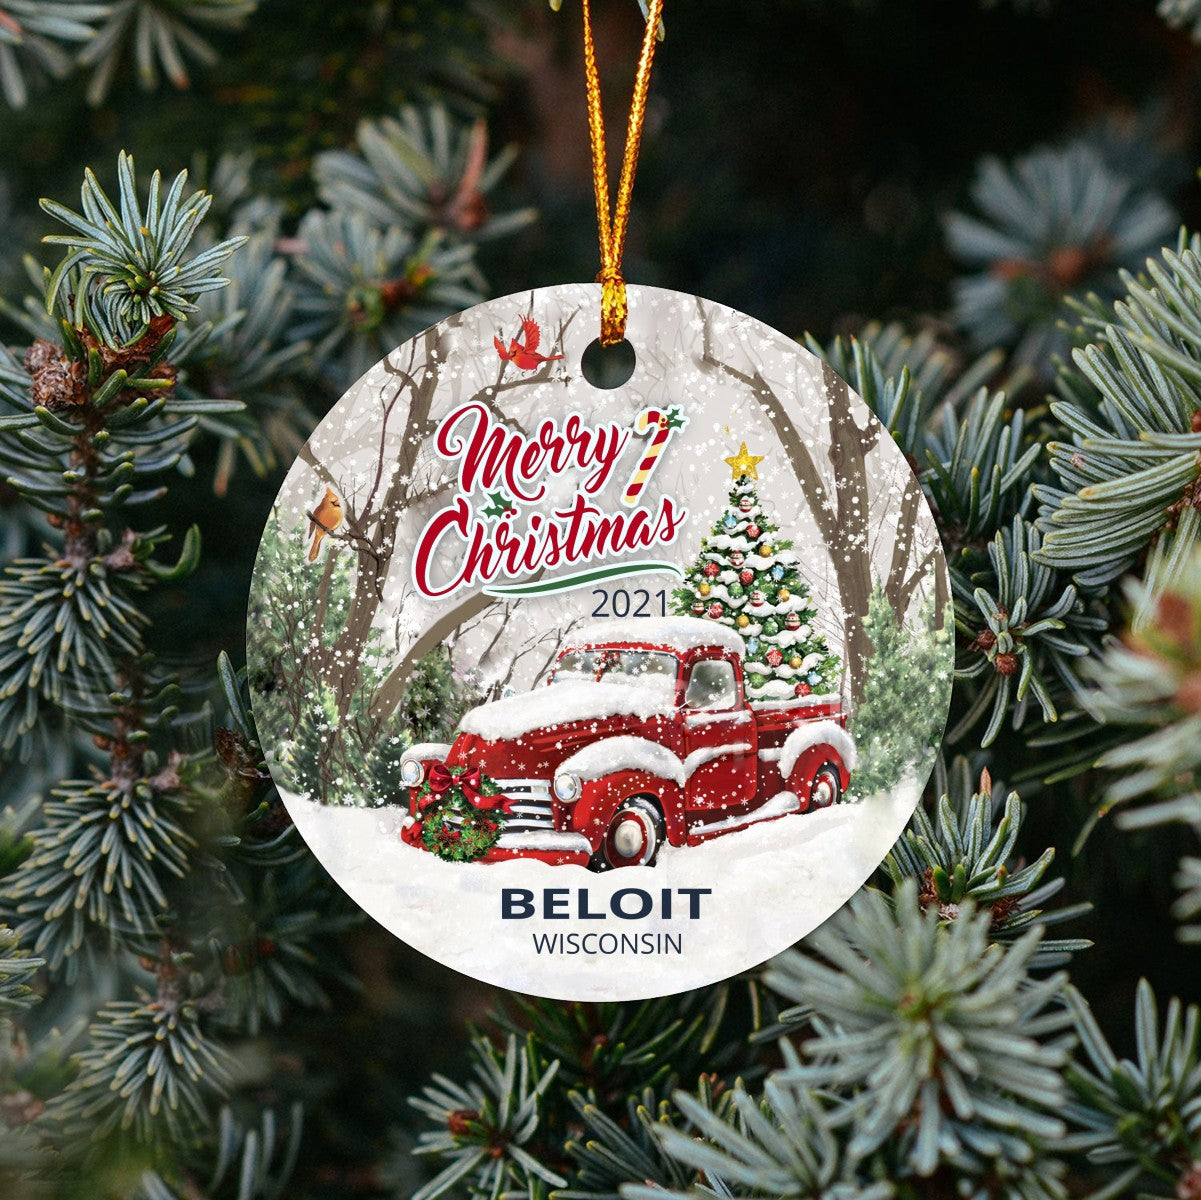 Christmas Tree Ornaments Beloit - Ornament Customize With Name City And State Beloit Wisconsin WI - Red Truck Xmas Ornaments 3'' Plastic Gift For Family, Friend And Housewarming